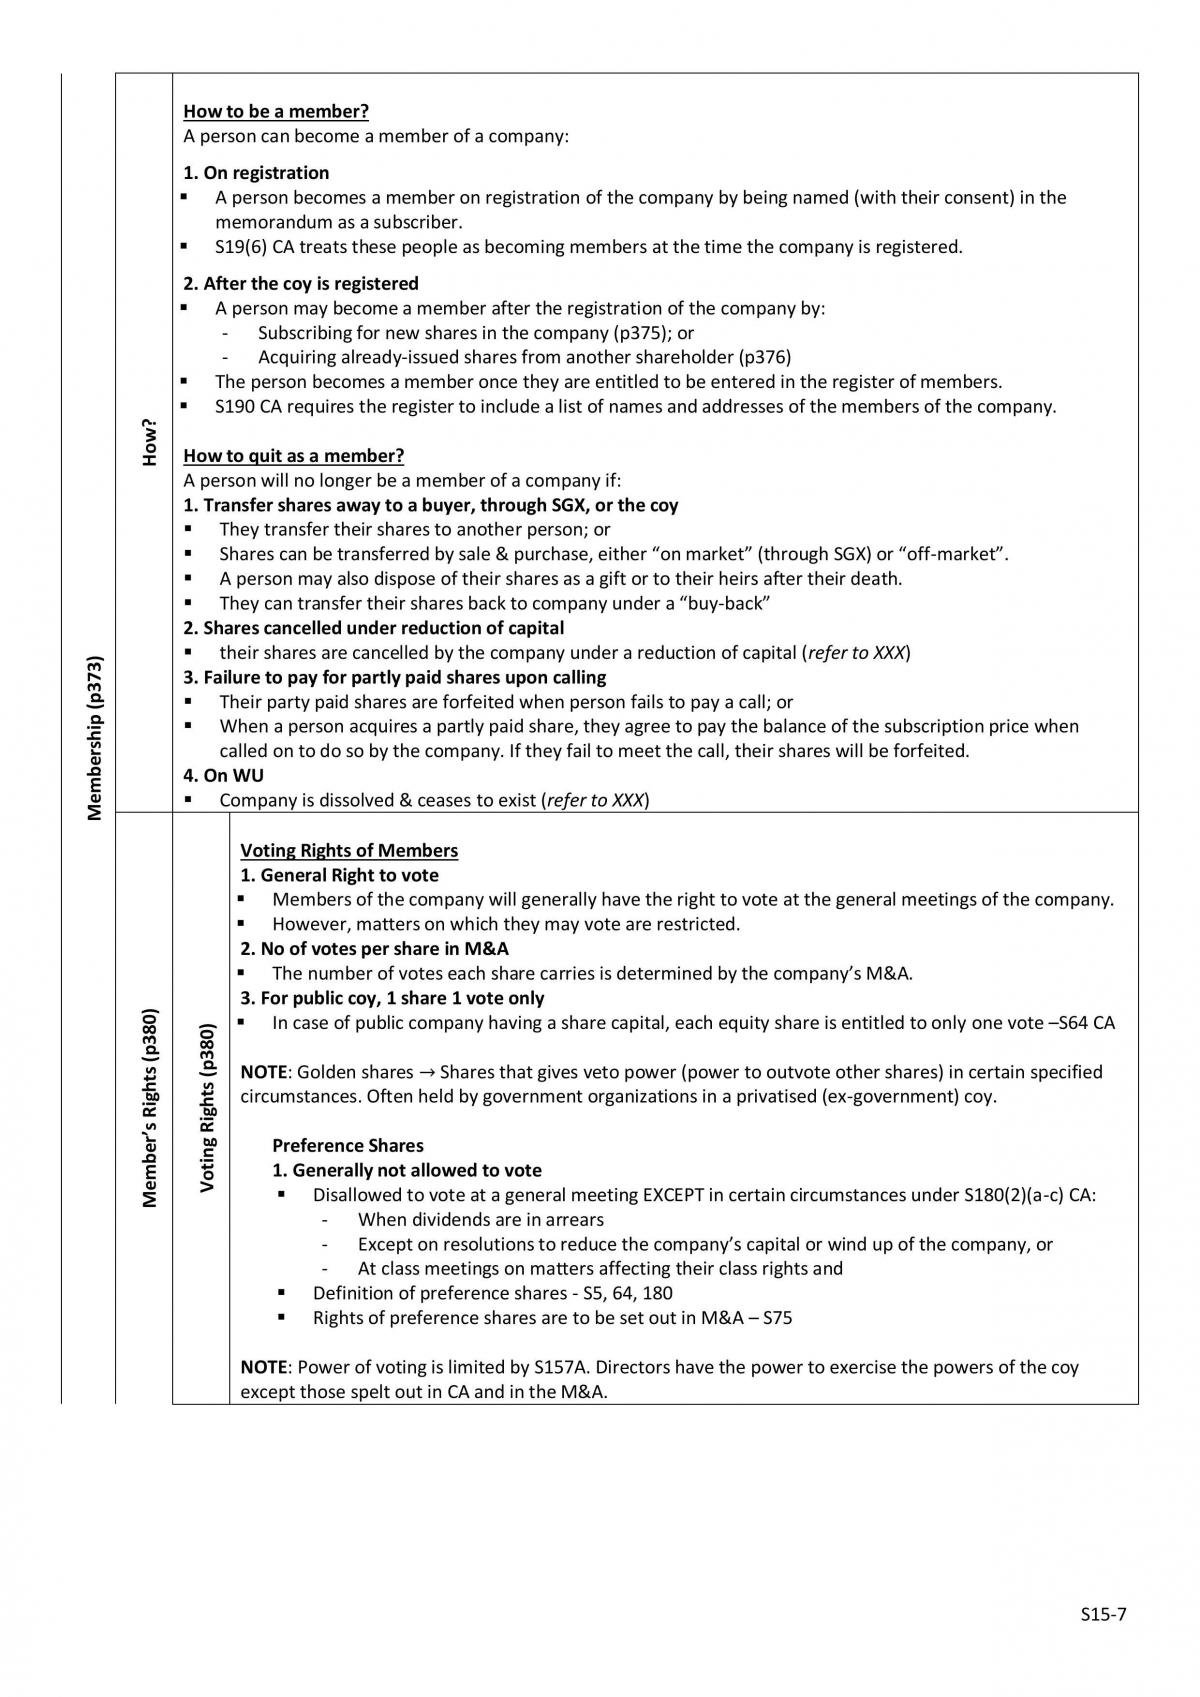 AC2302 Company Law Complete Study Notes - Page 90